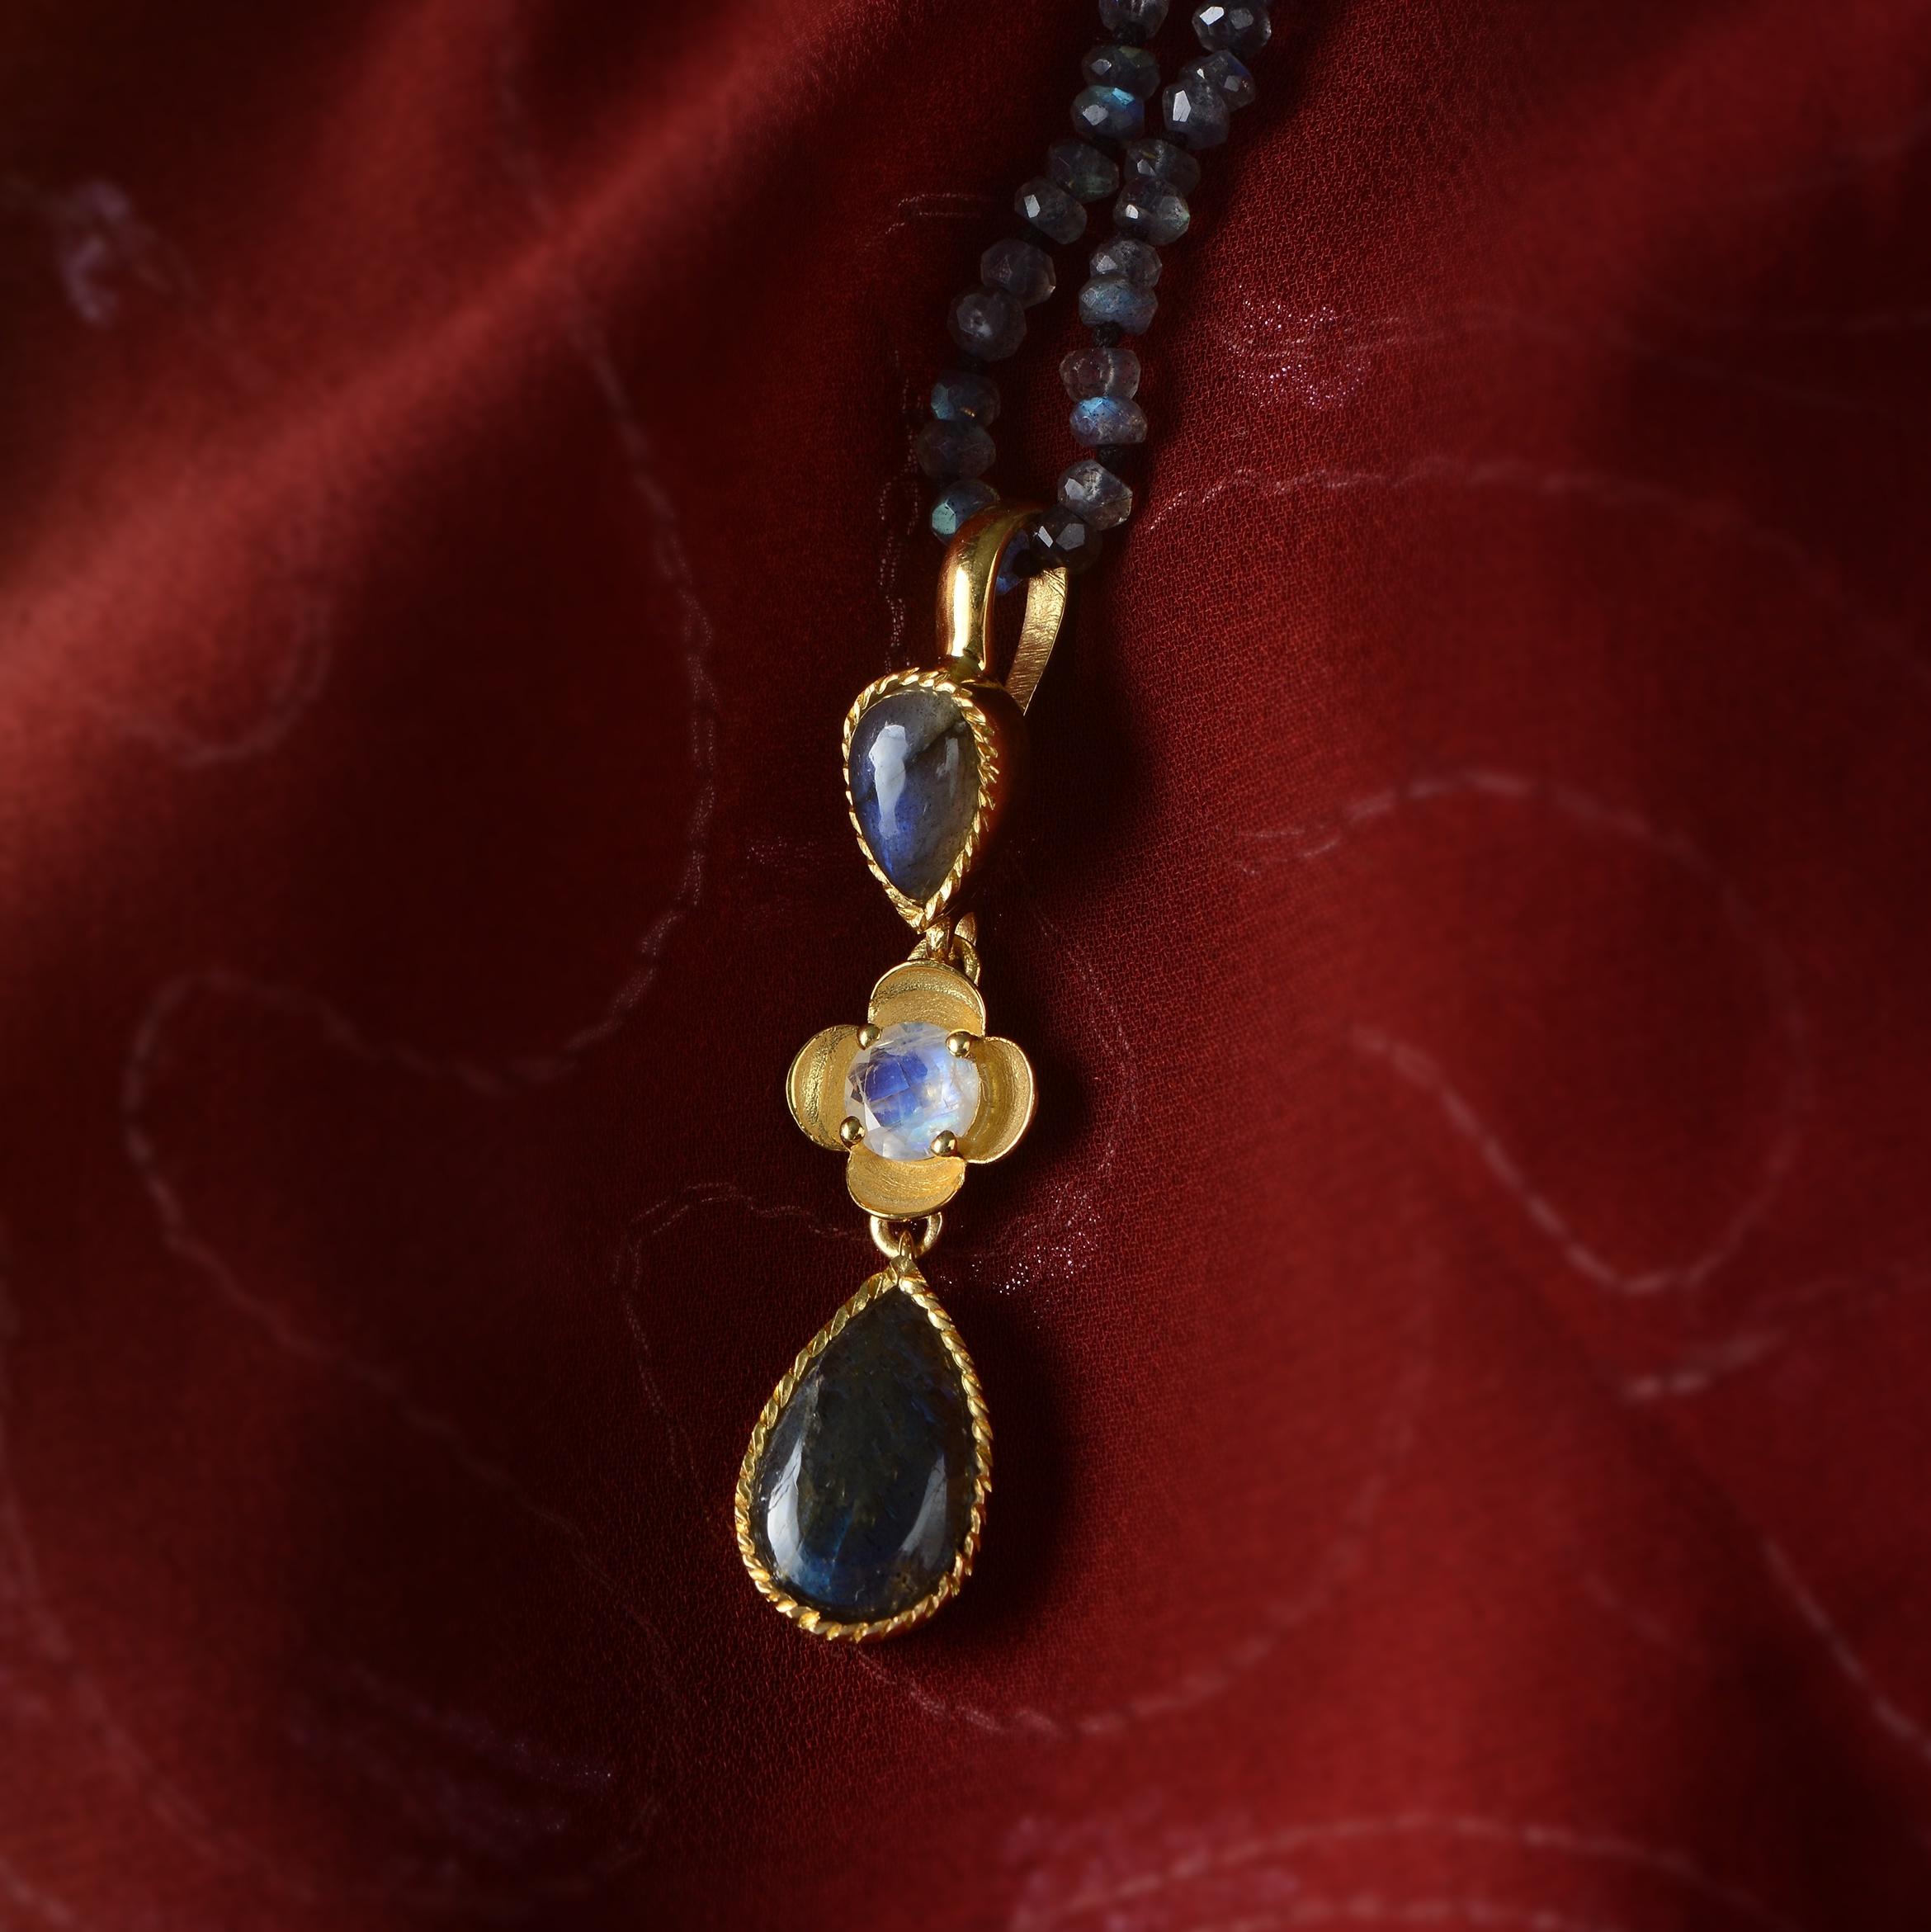 This beautiful labradorite moonstone teardrop shaped pendant has been handmade in our workshops.

It is made in 24k gold plate coated over sterling silver and is from a limited edition. The pendant has matching earrings and ring. It comes with a 26